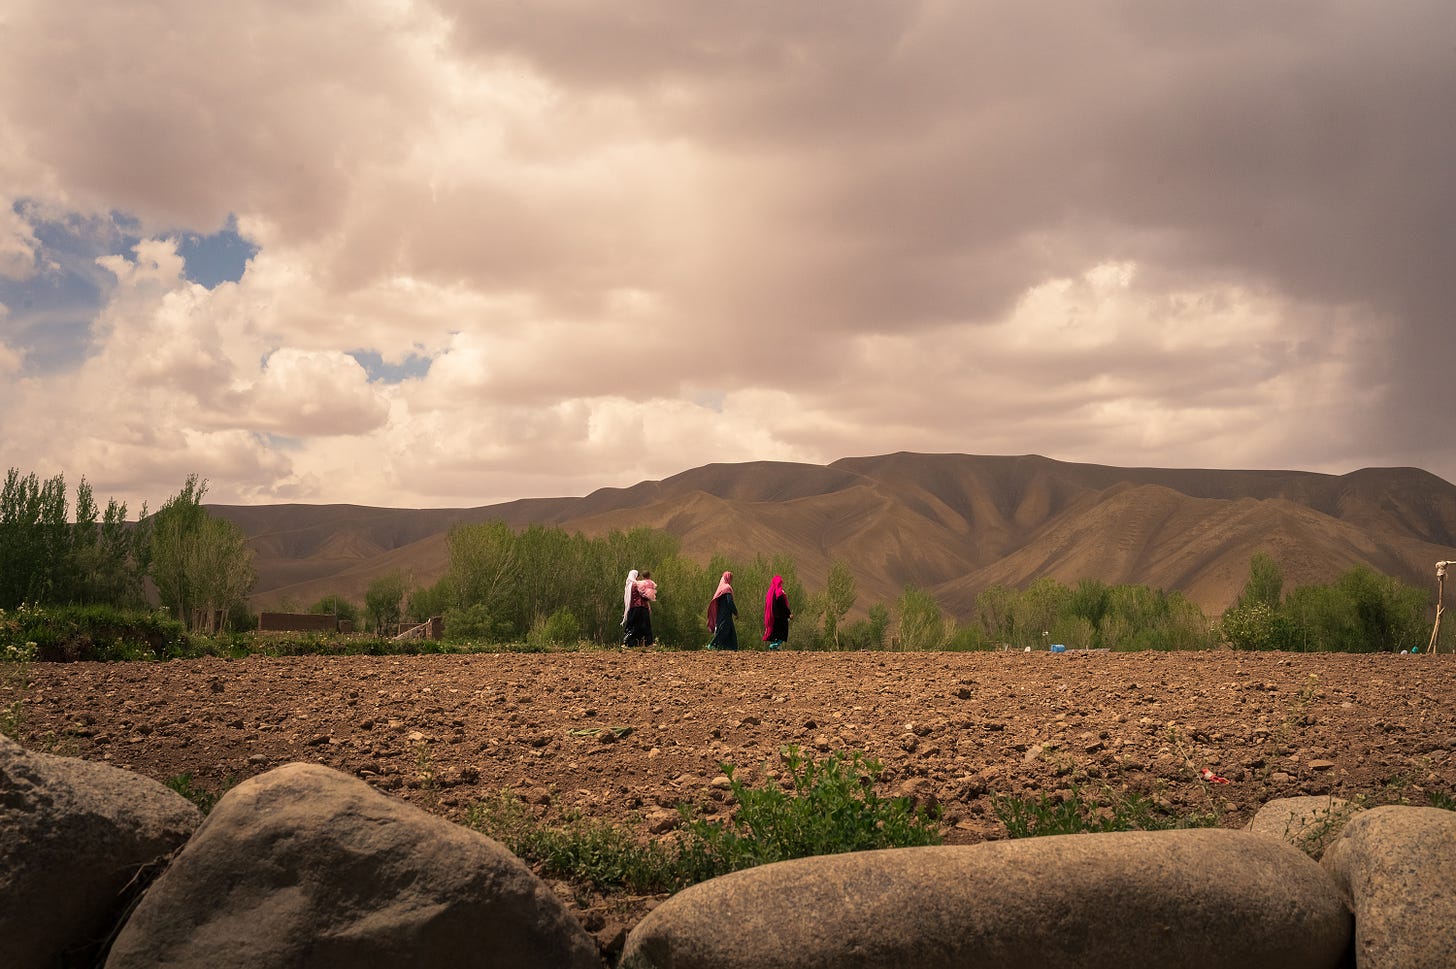 Women walk in Bamiyan province on May 22, 2023. (Photo by Elise Blanchard for The Washington Post via Getty Images).